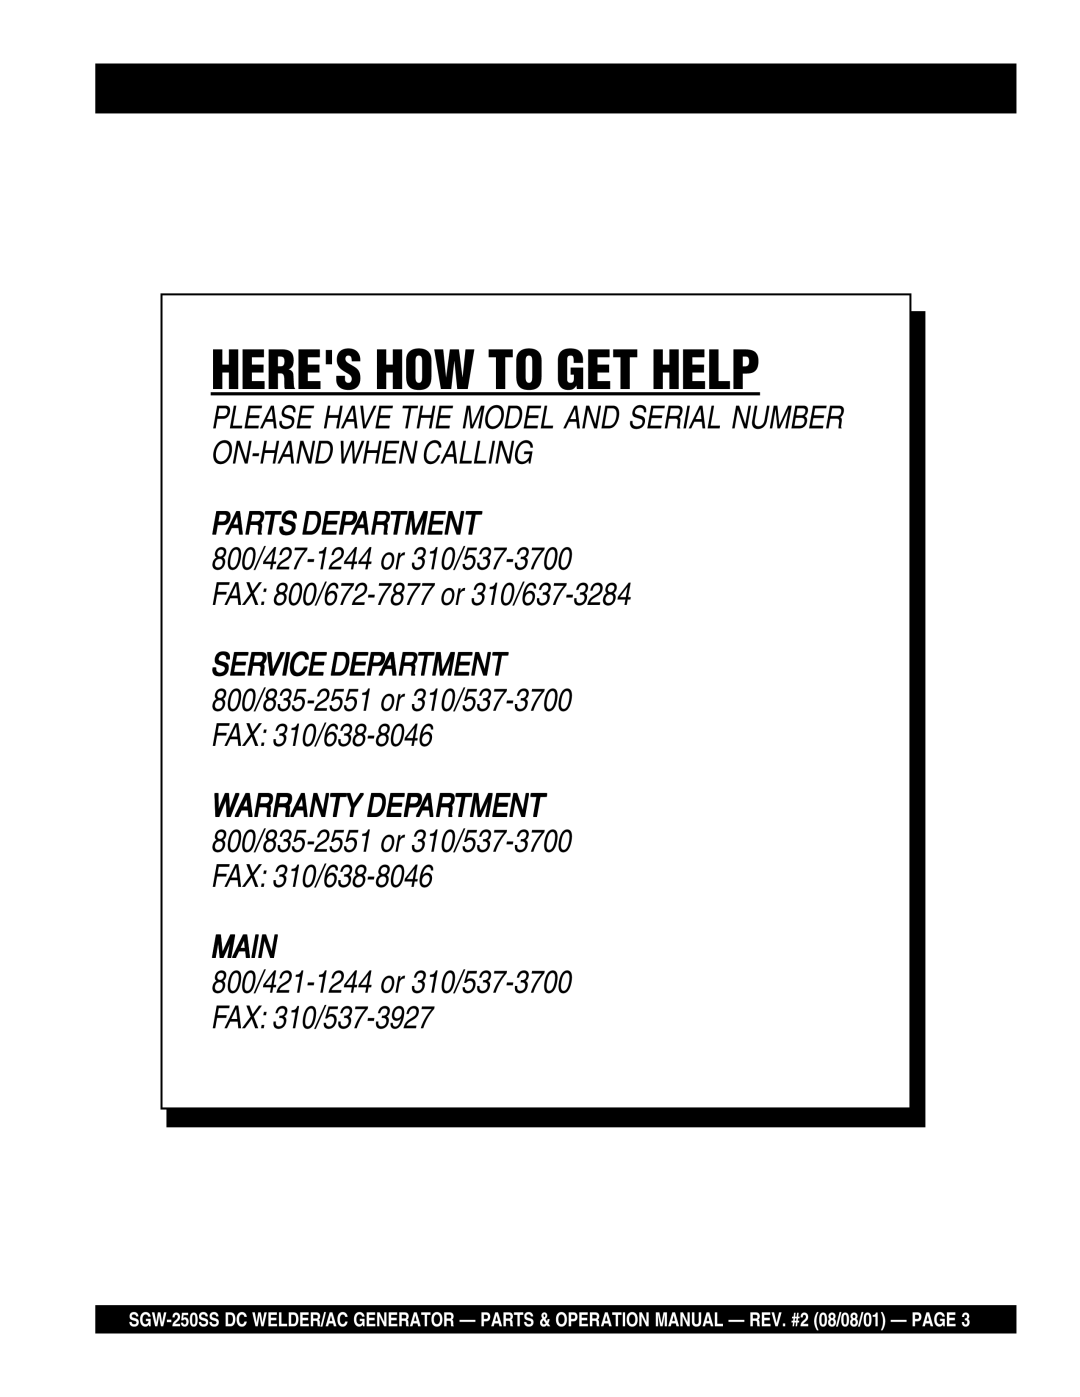 Multiquip SGW-250SS operation manual Heres How To Get Help, Main, 800/421-1244or 310/537-3700FAX 310/537-3927 